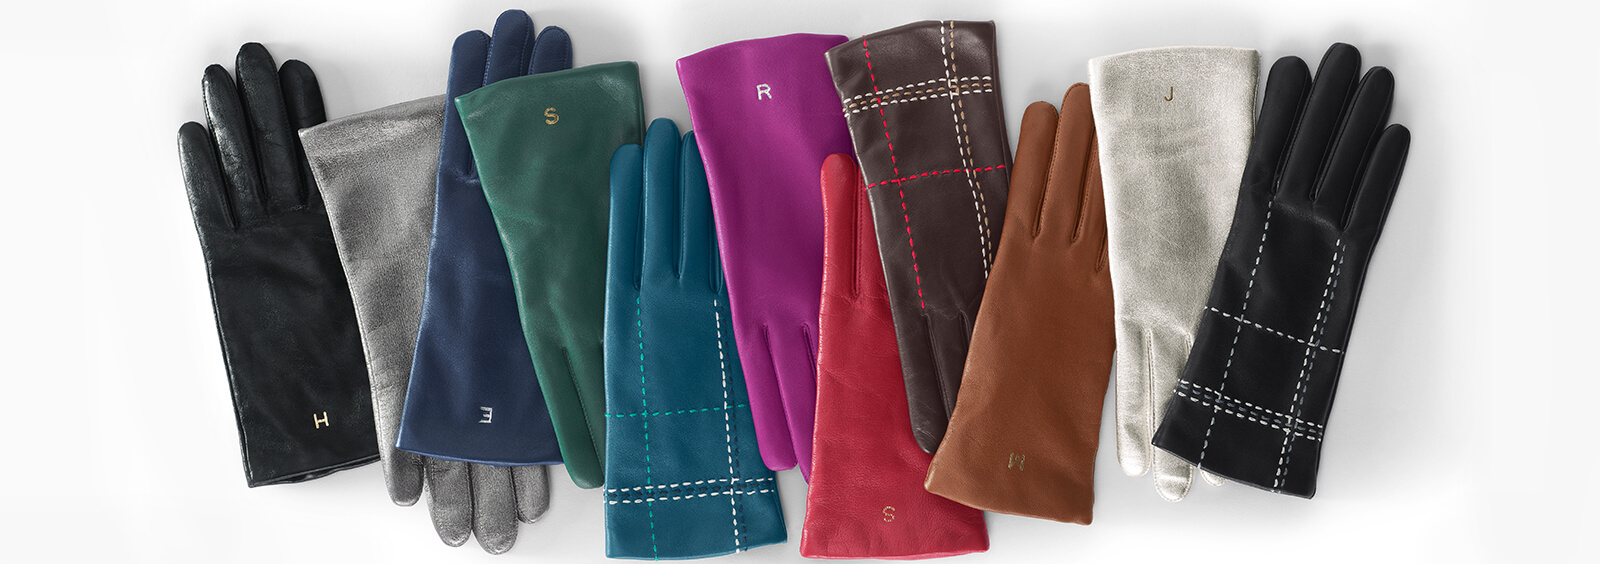 8 Options for Keeping Your Hands Warm This Winter | Lands' End